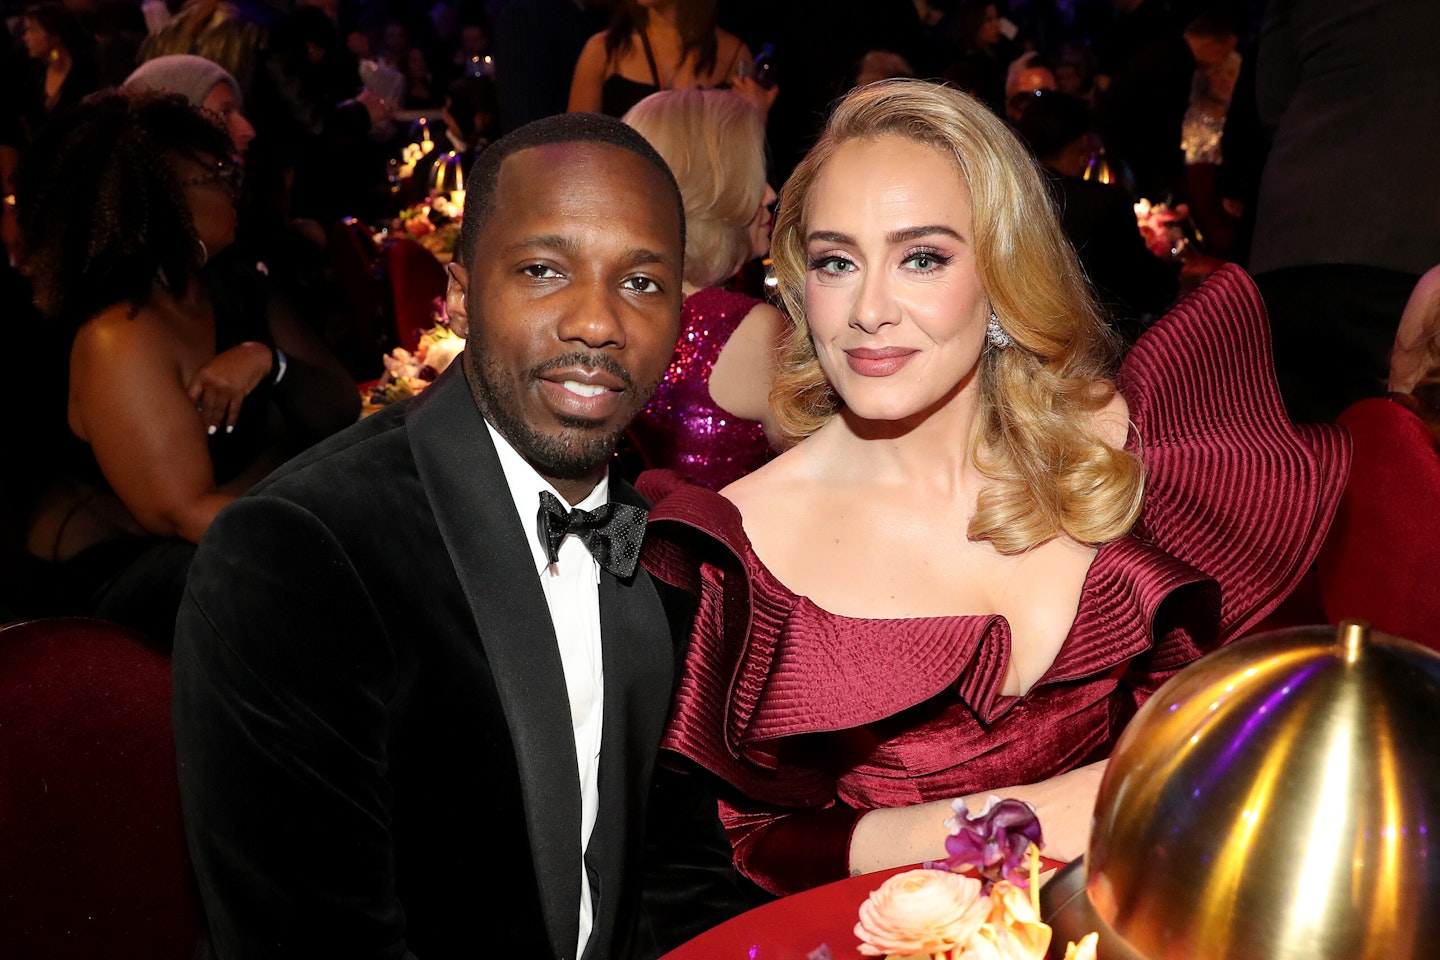 Rich Paul and Adele sitting at a table in formal clothes